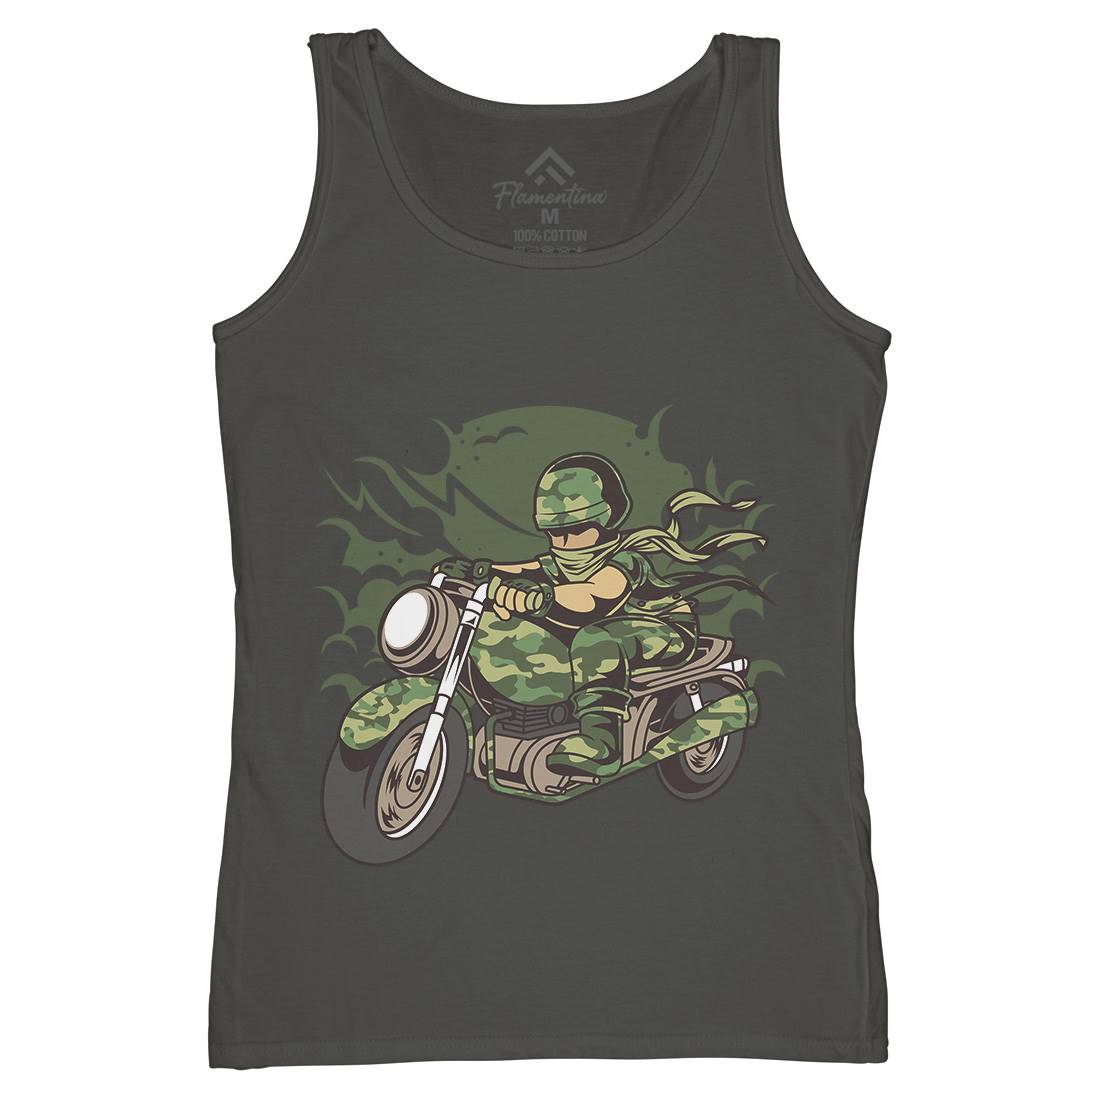 Motorcycle Ride Womens Organic Tank Top Vest Army C306